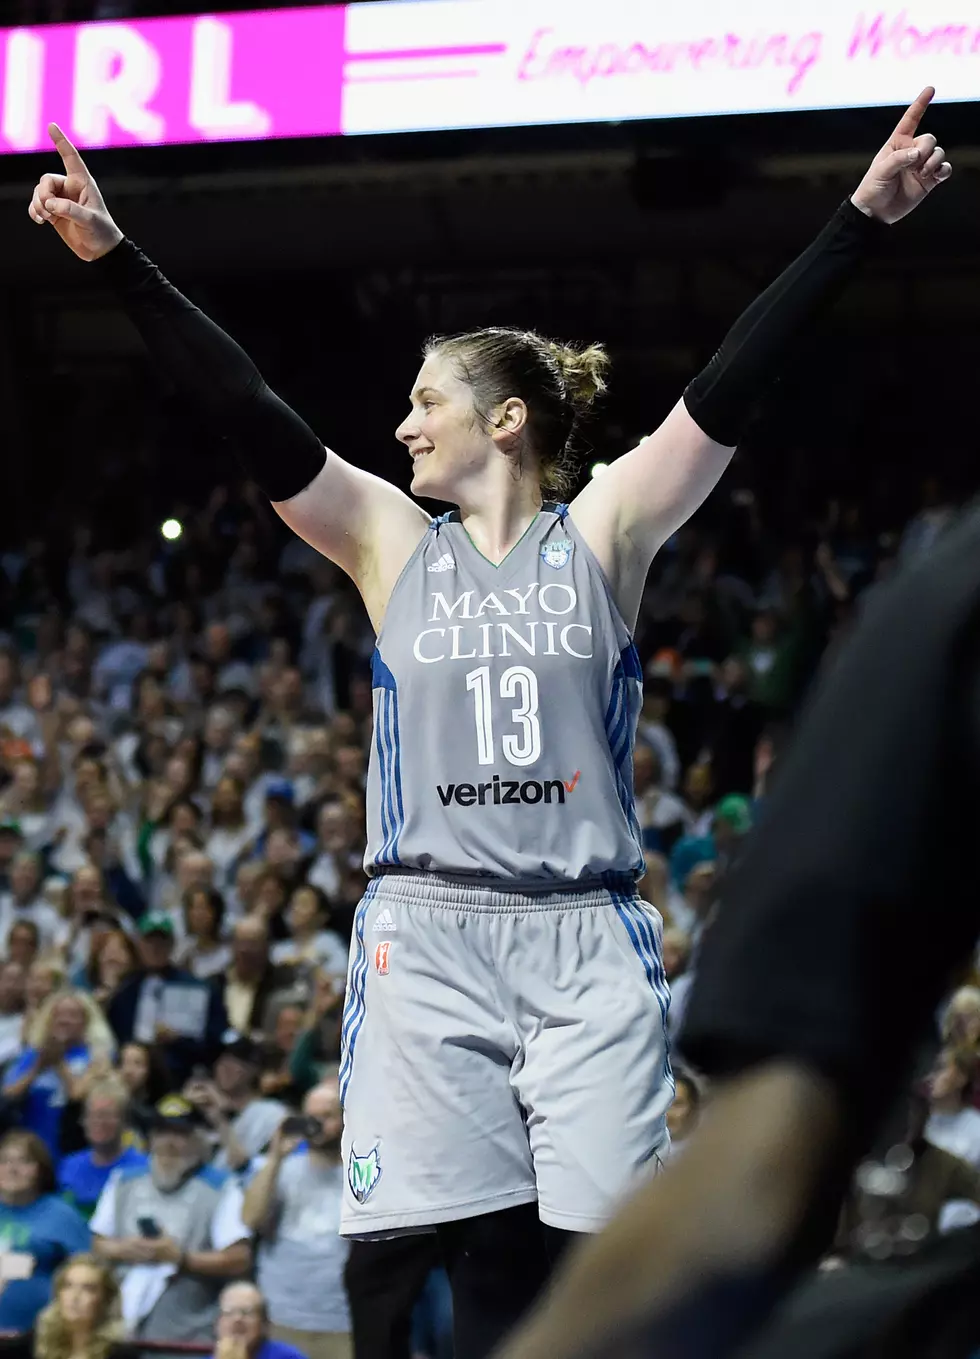 The Minnesota Lynx Are Going To Retire Lindsay Whalen’s Number